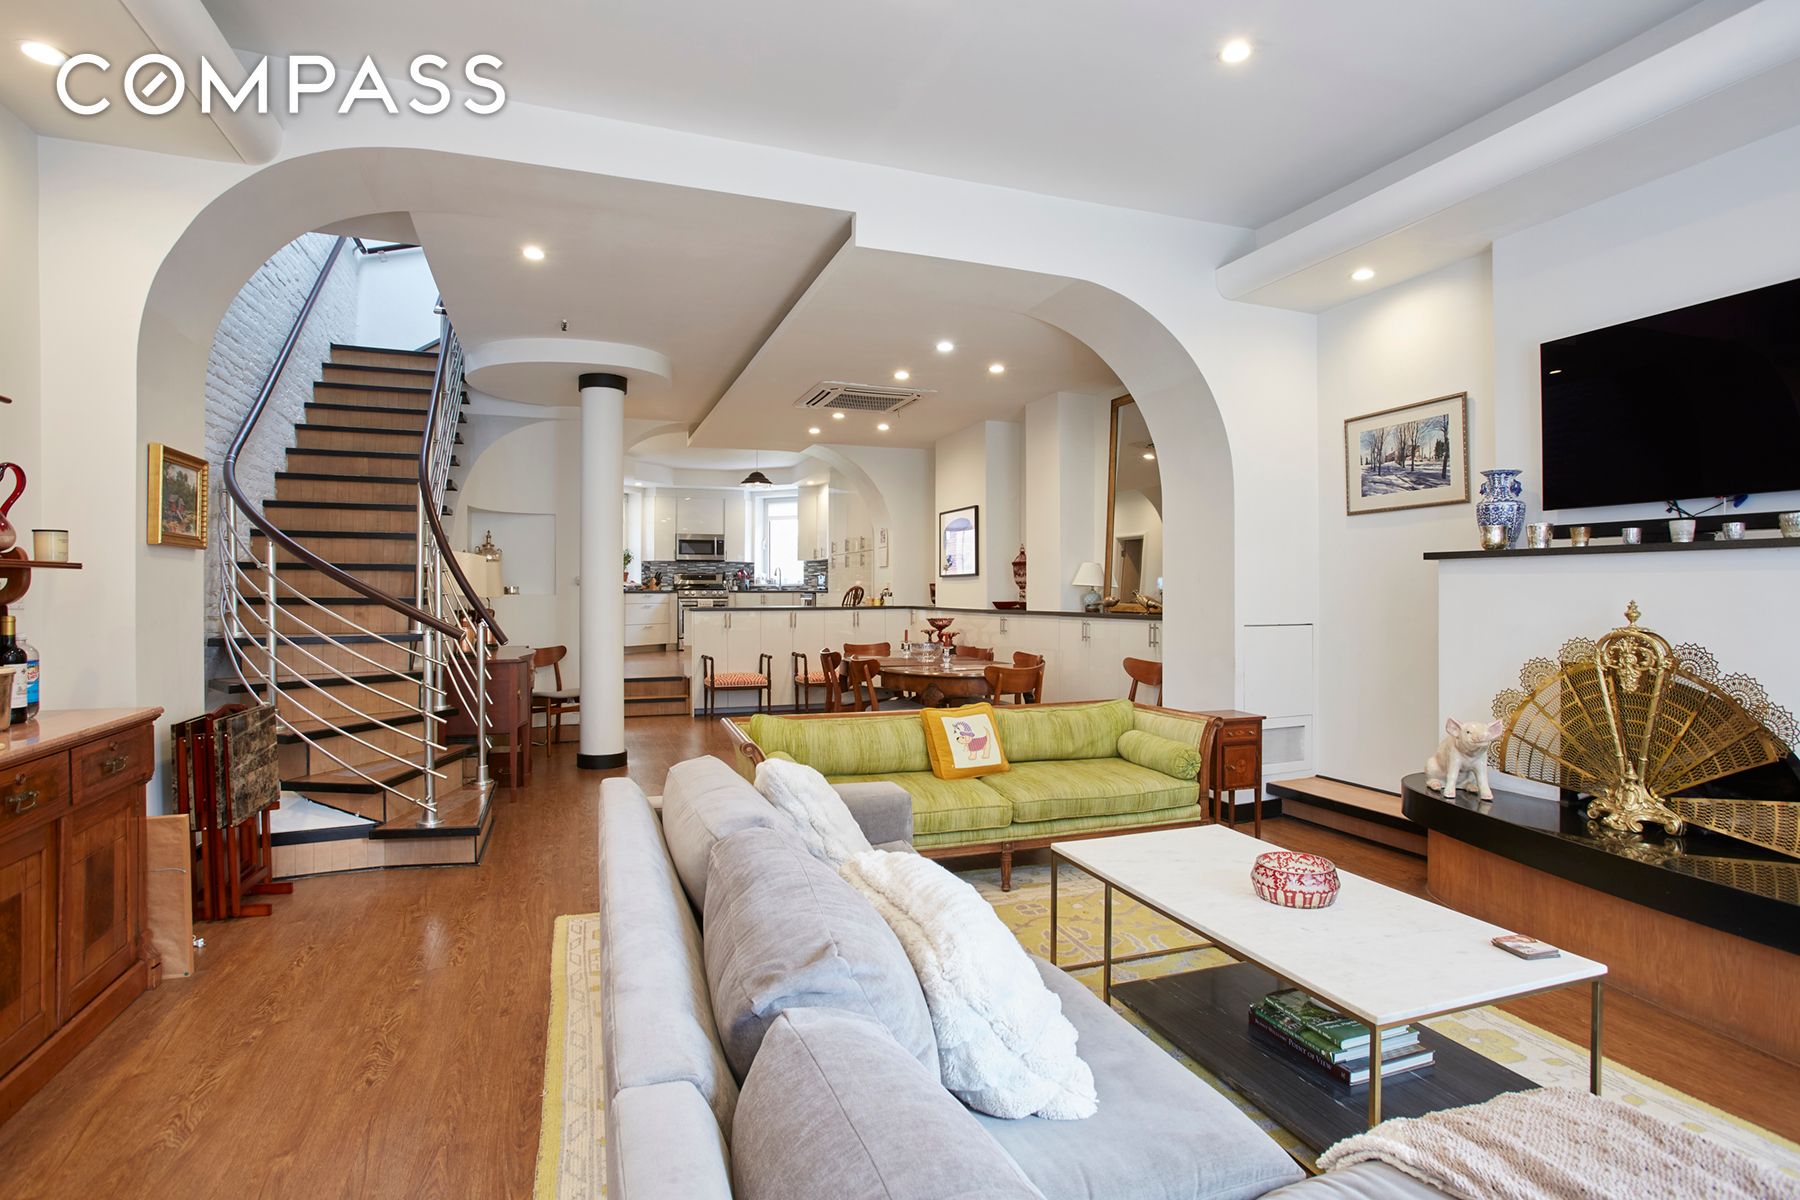 1302 Madison Avenue 3rd/4, Upper East Side, Upper East Side, NYC - 3 Bedrooms  
3.5 Bathrooms  
5 Rooms - 